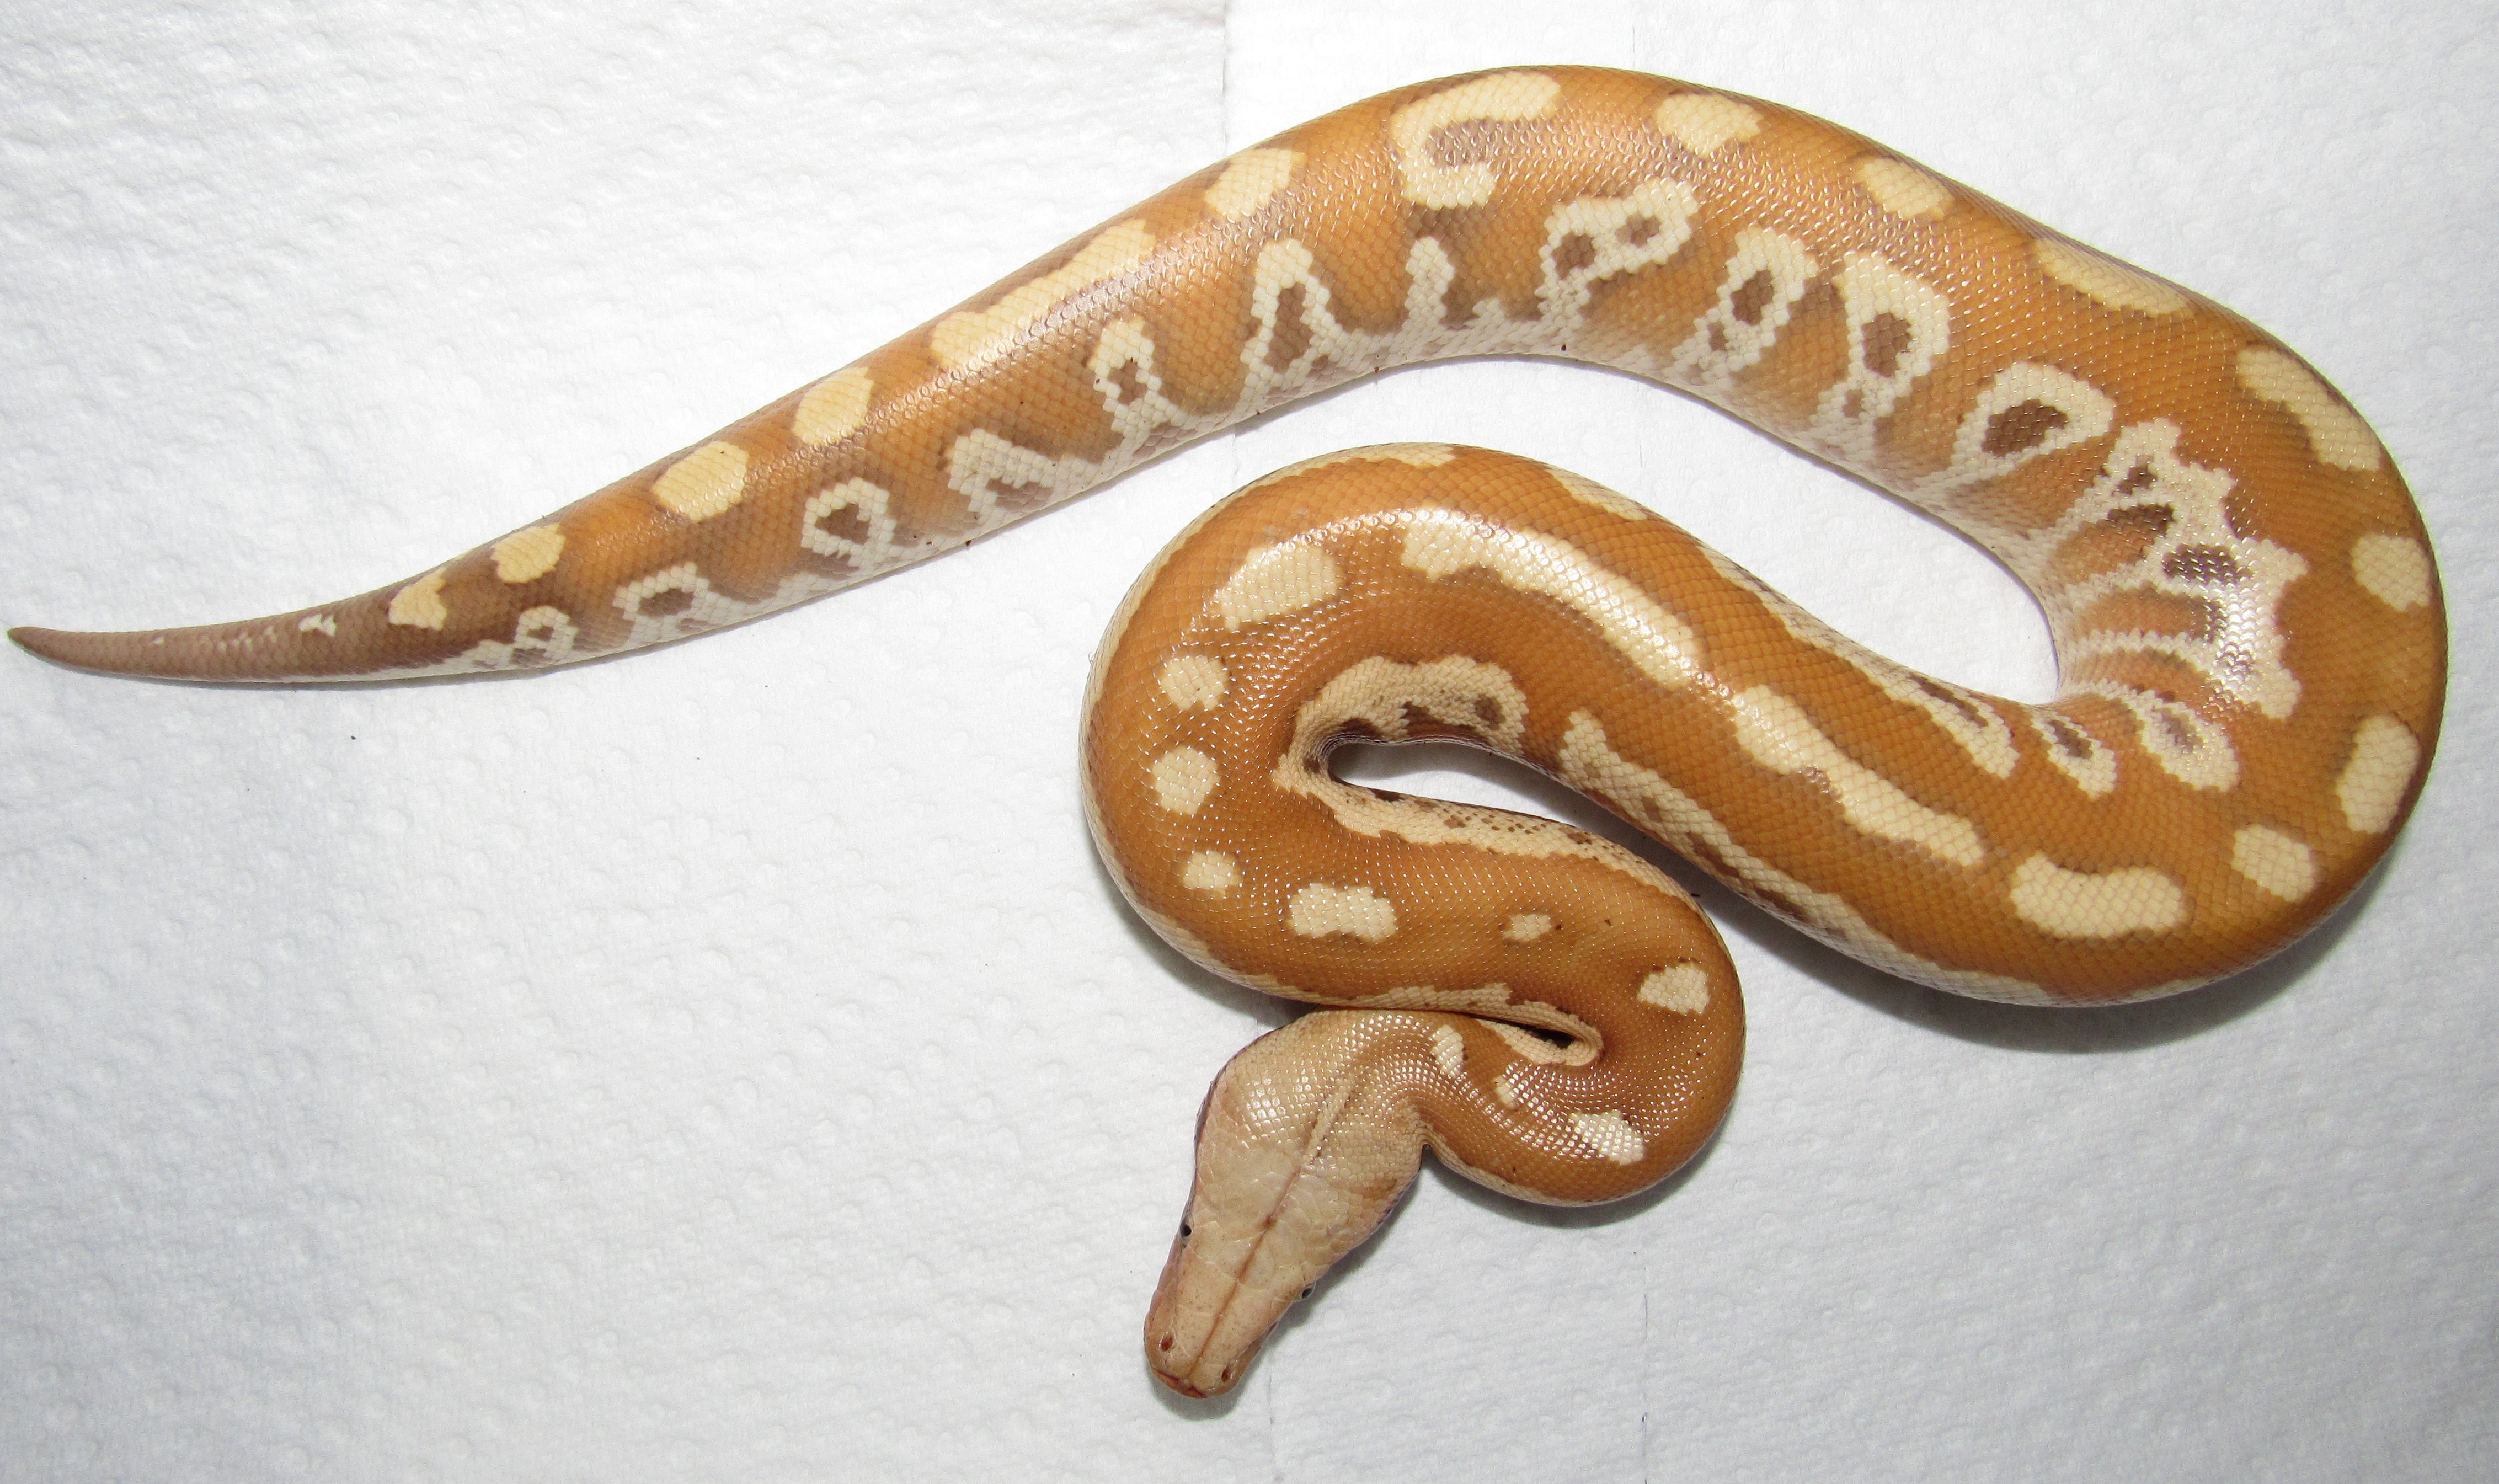 T+ Albino Blood Python by Wallflower Herpetoculture